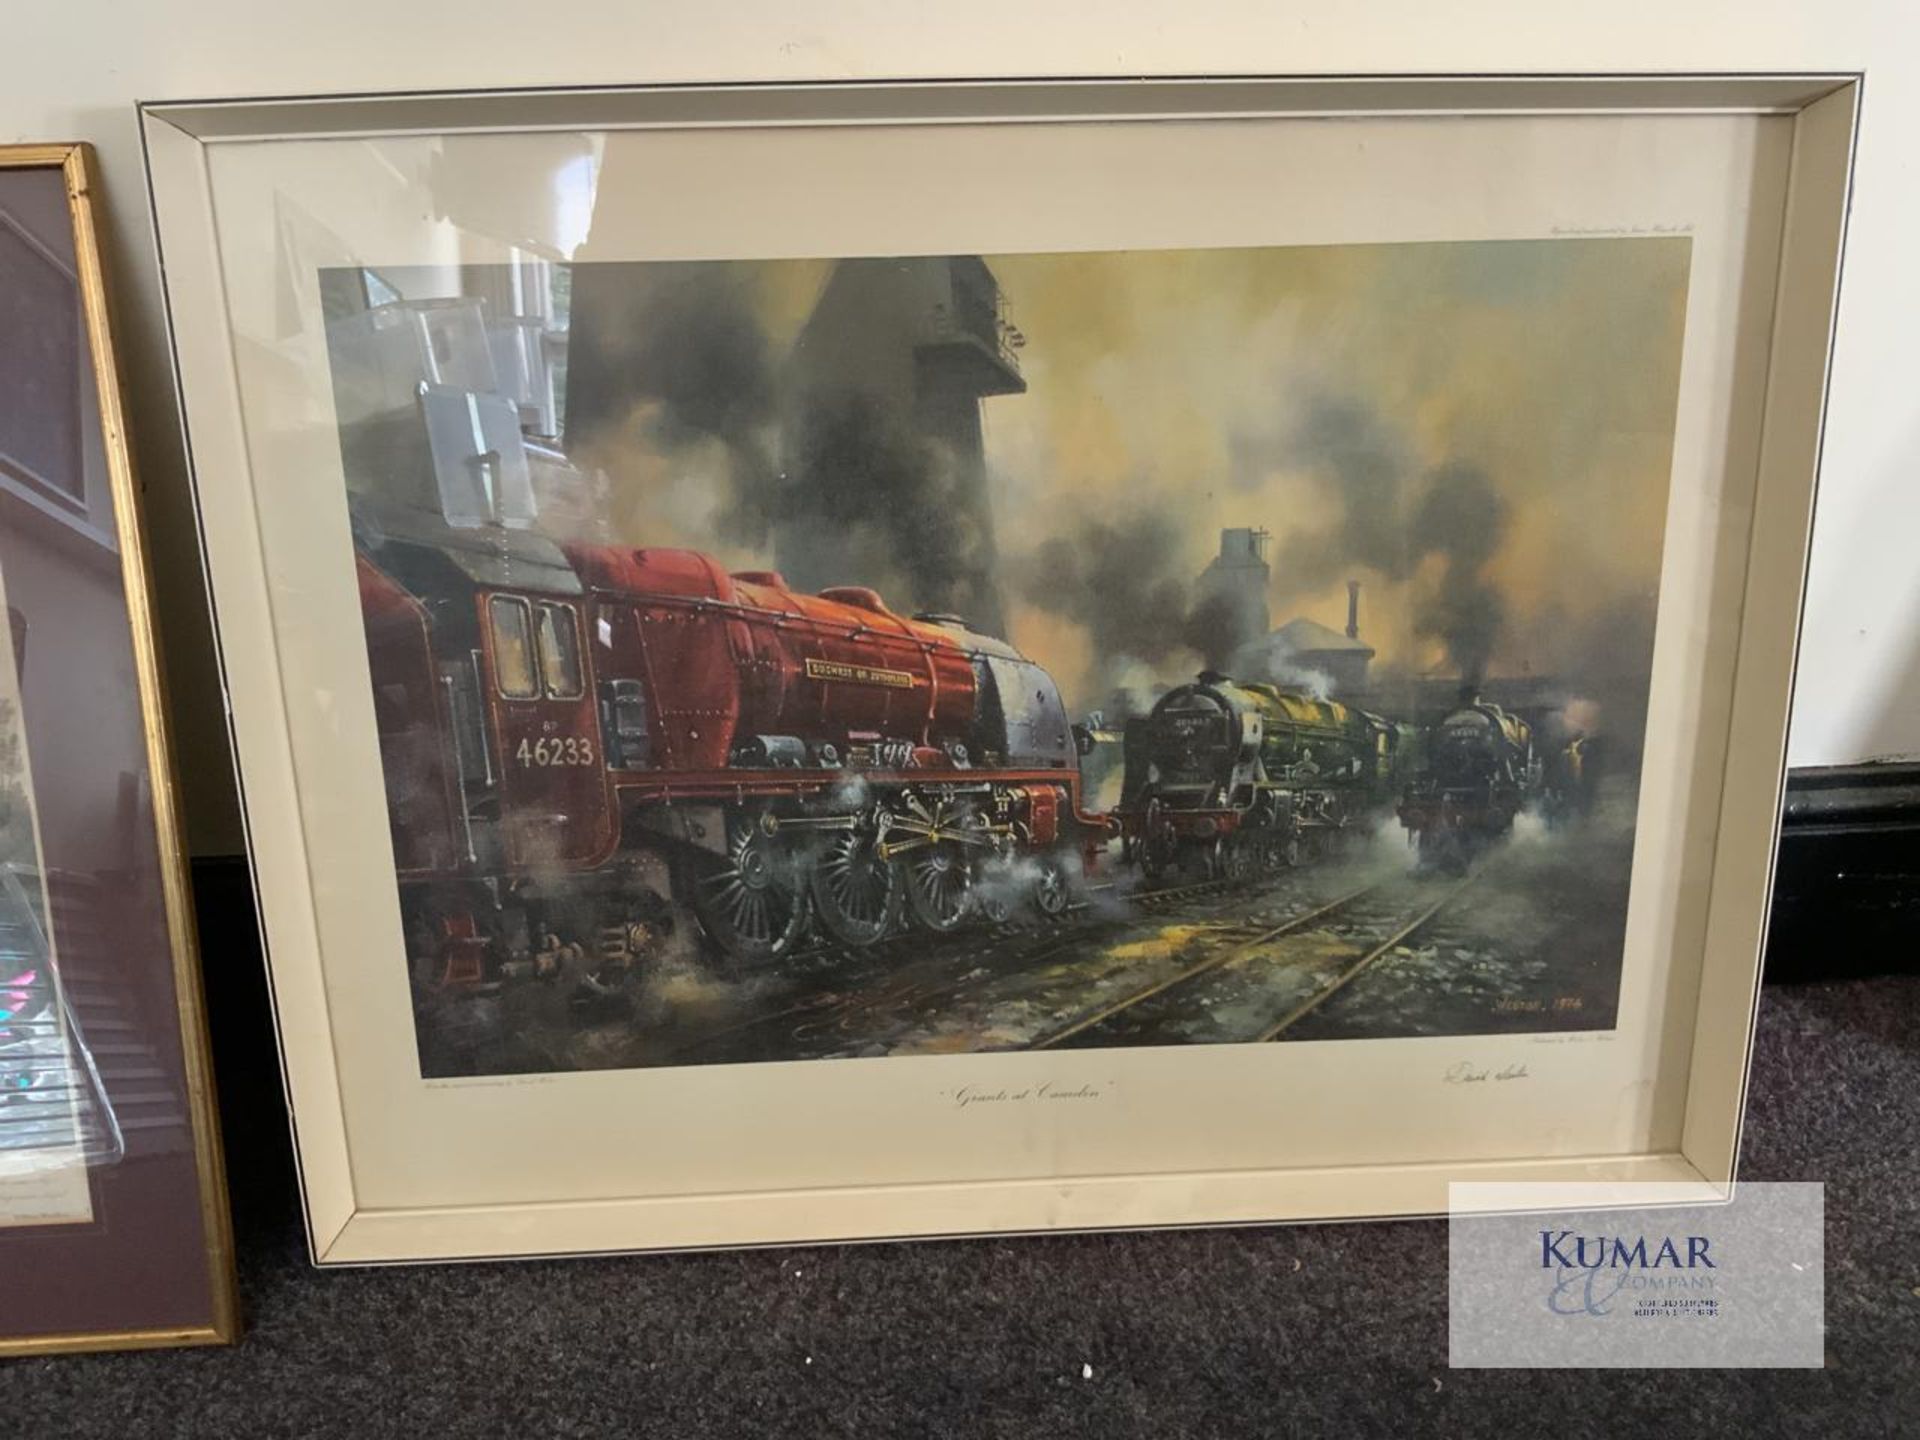 4: Various Pictures, Paintings, Drawings & Picture Frame Etc - Including David Weston 1974 Railway - Image 7 of 10